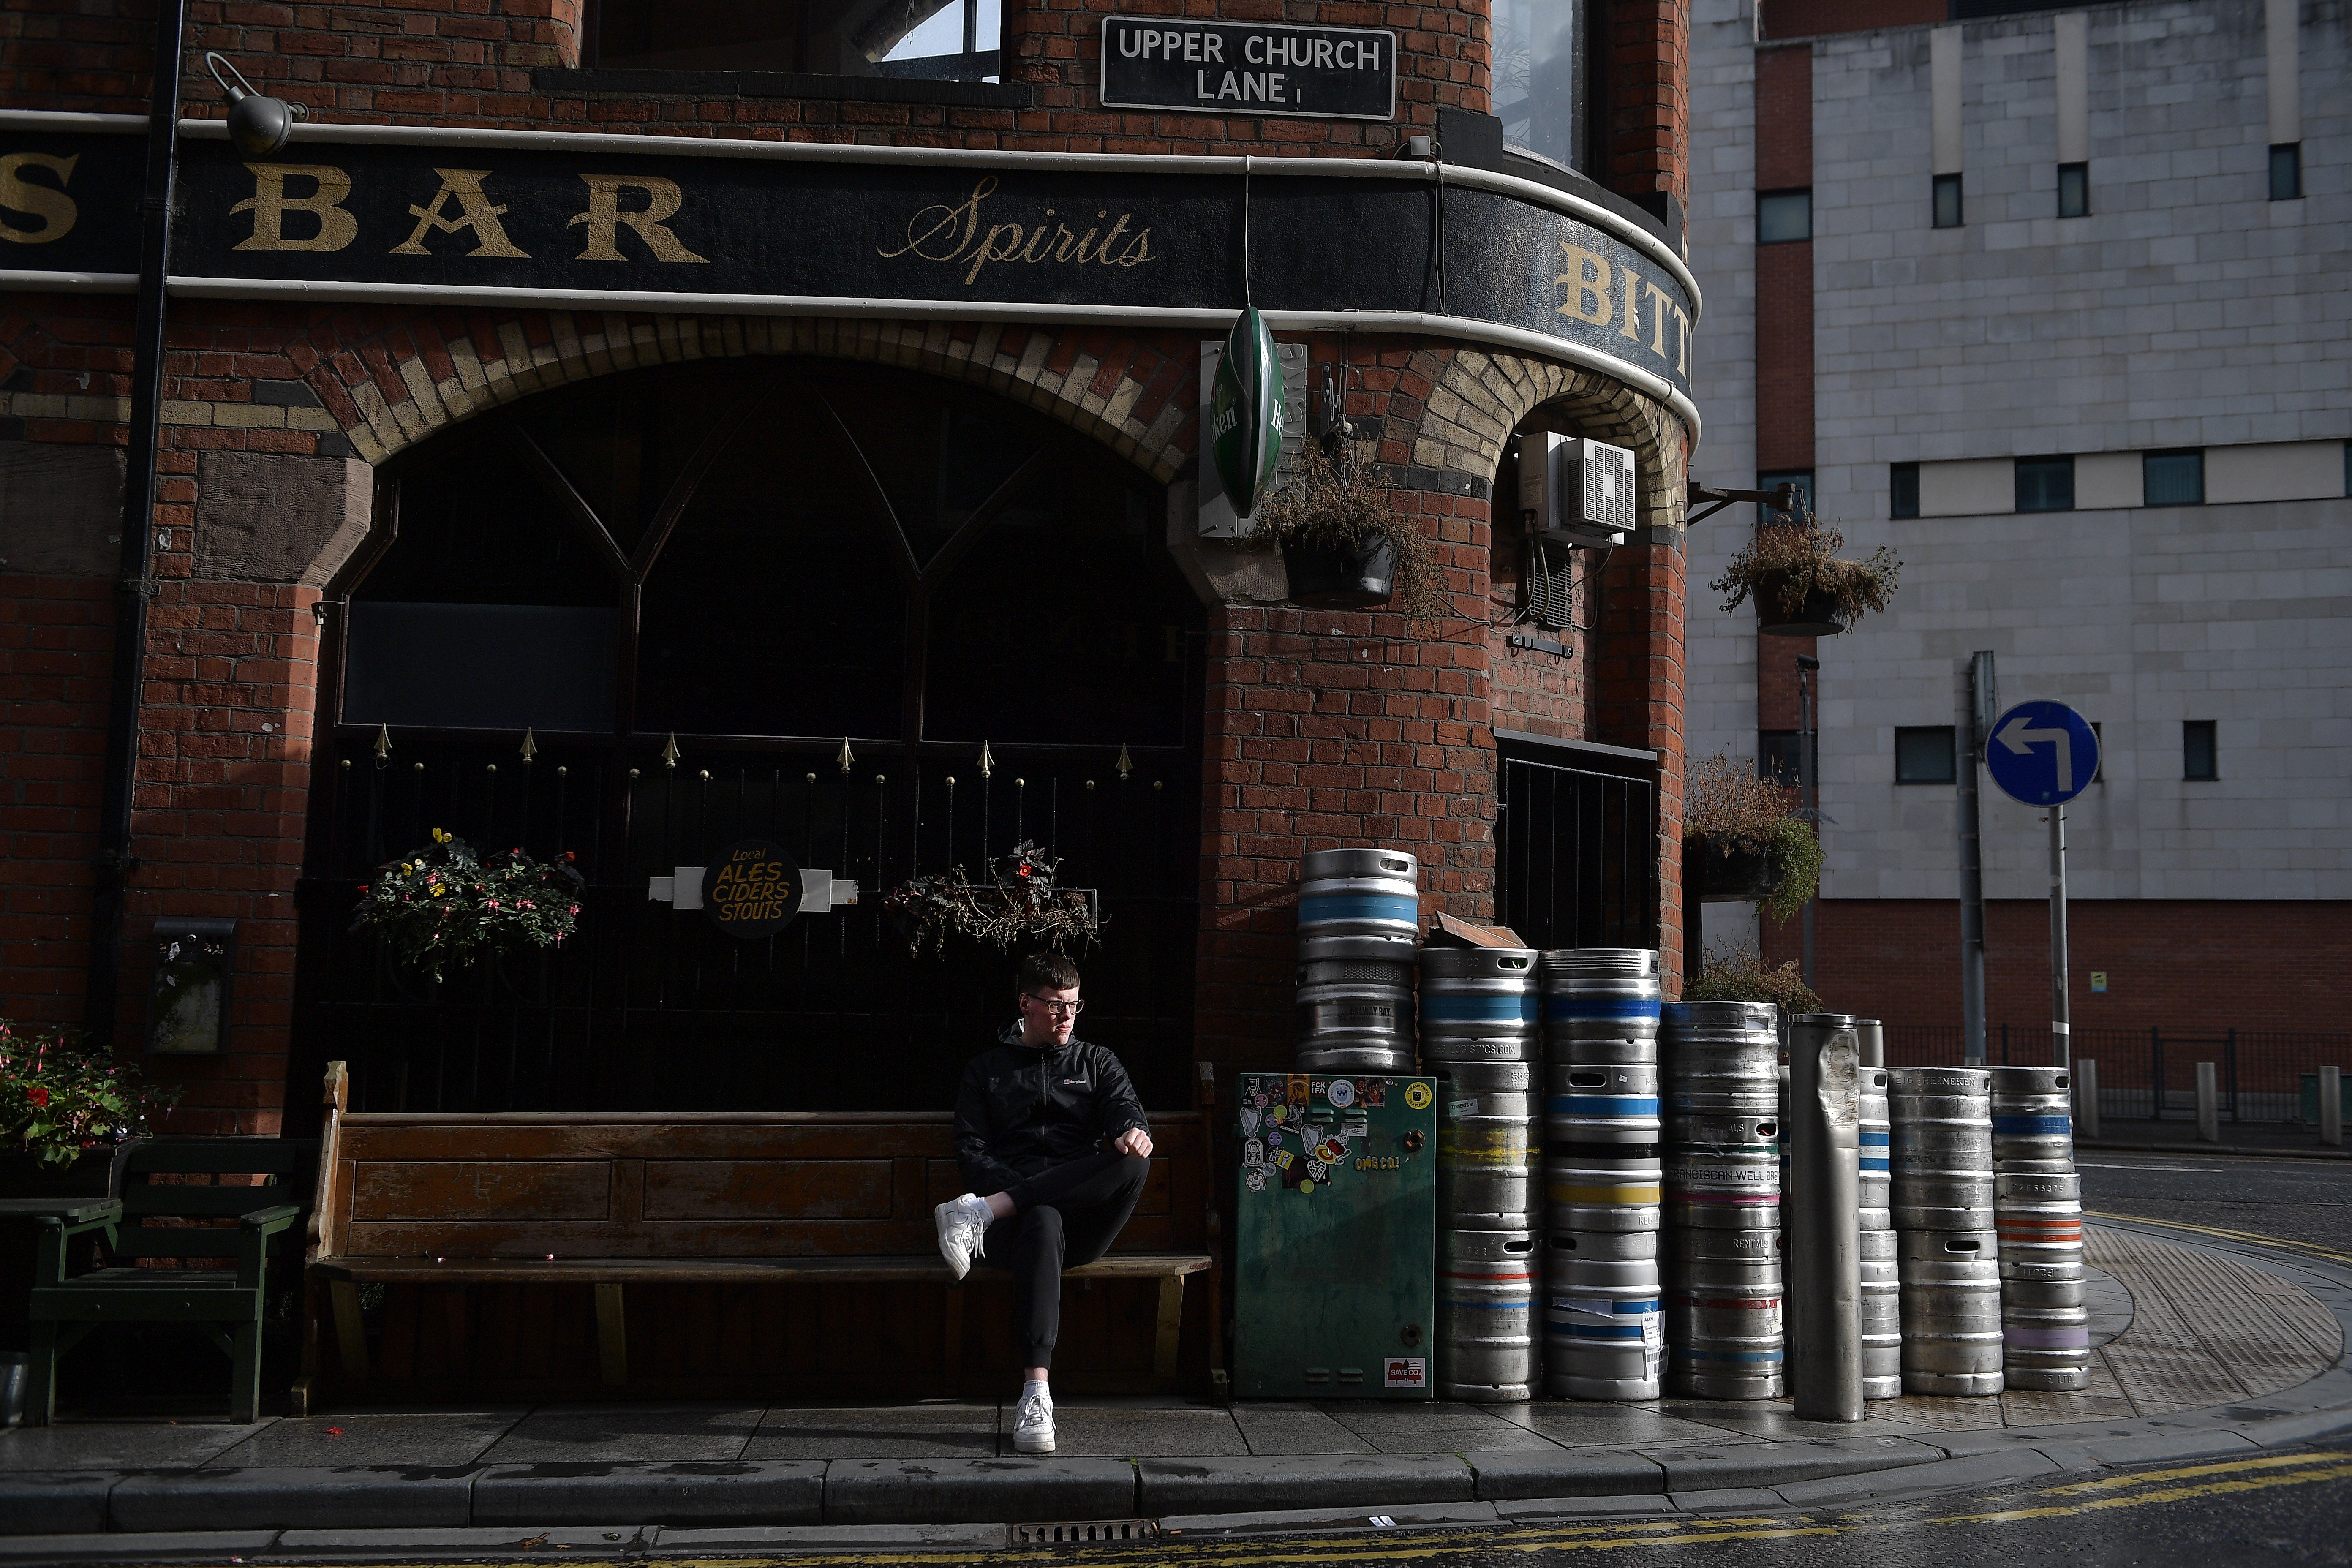 Bars across Northern Ireland have been told to close for four weeks from Friday